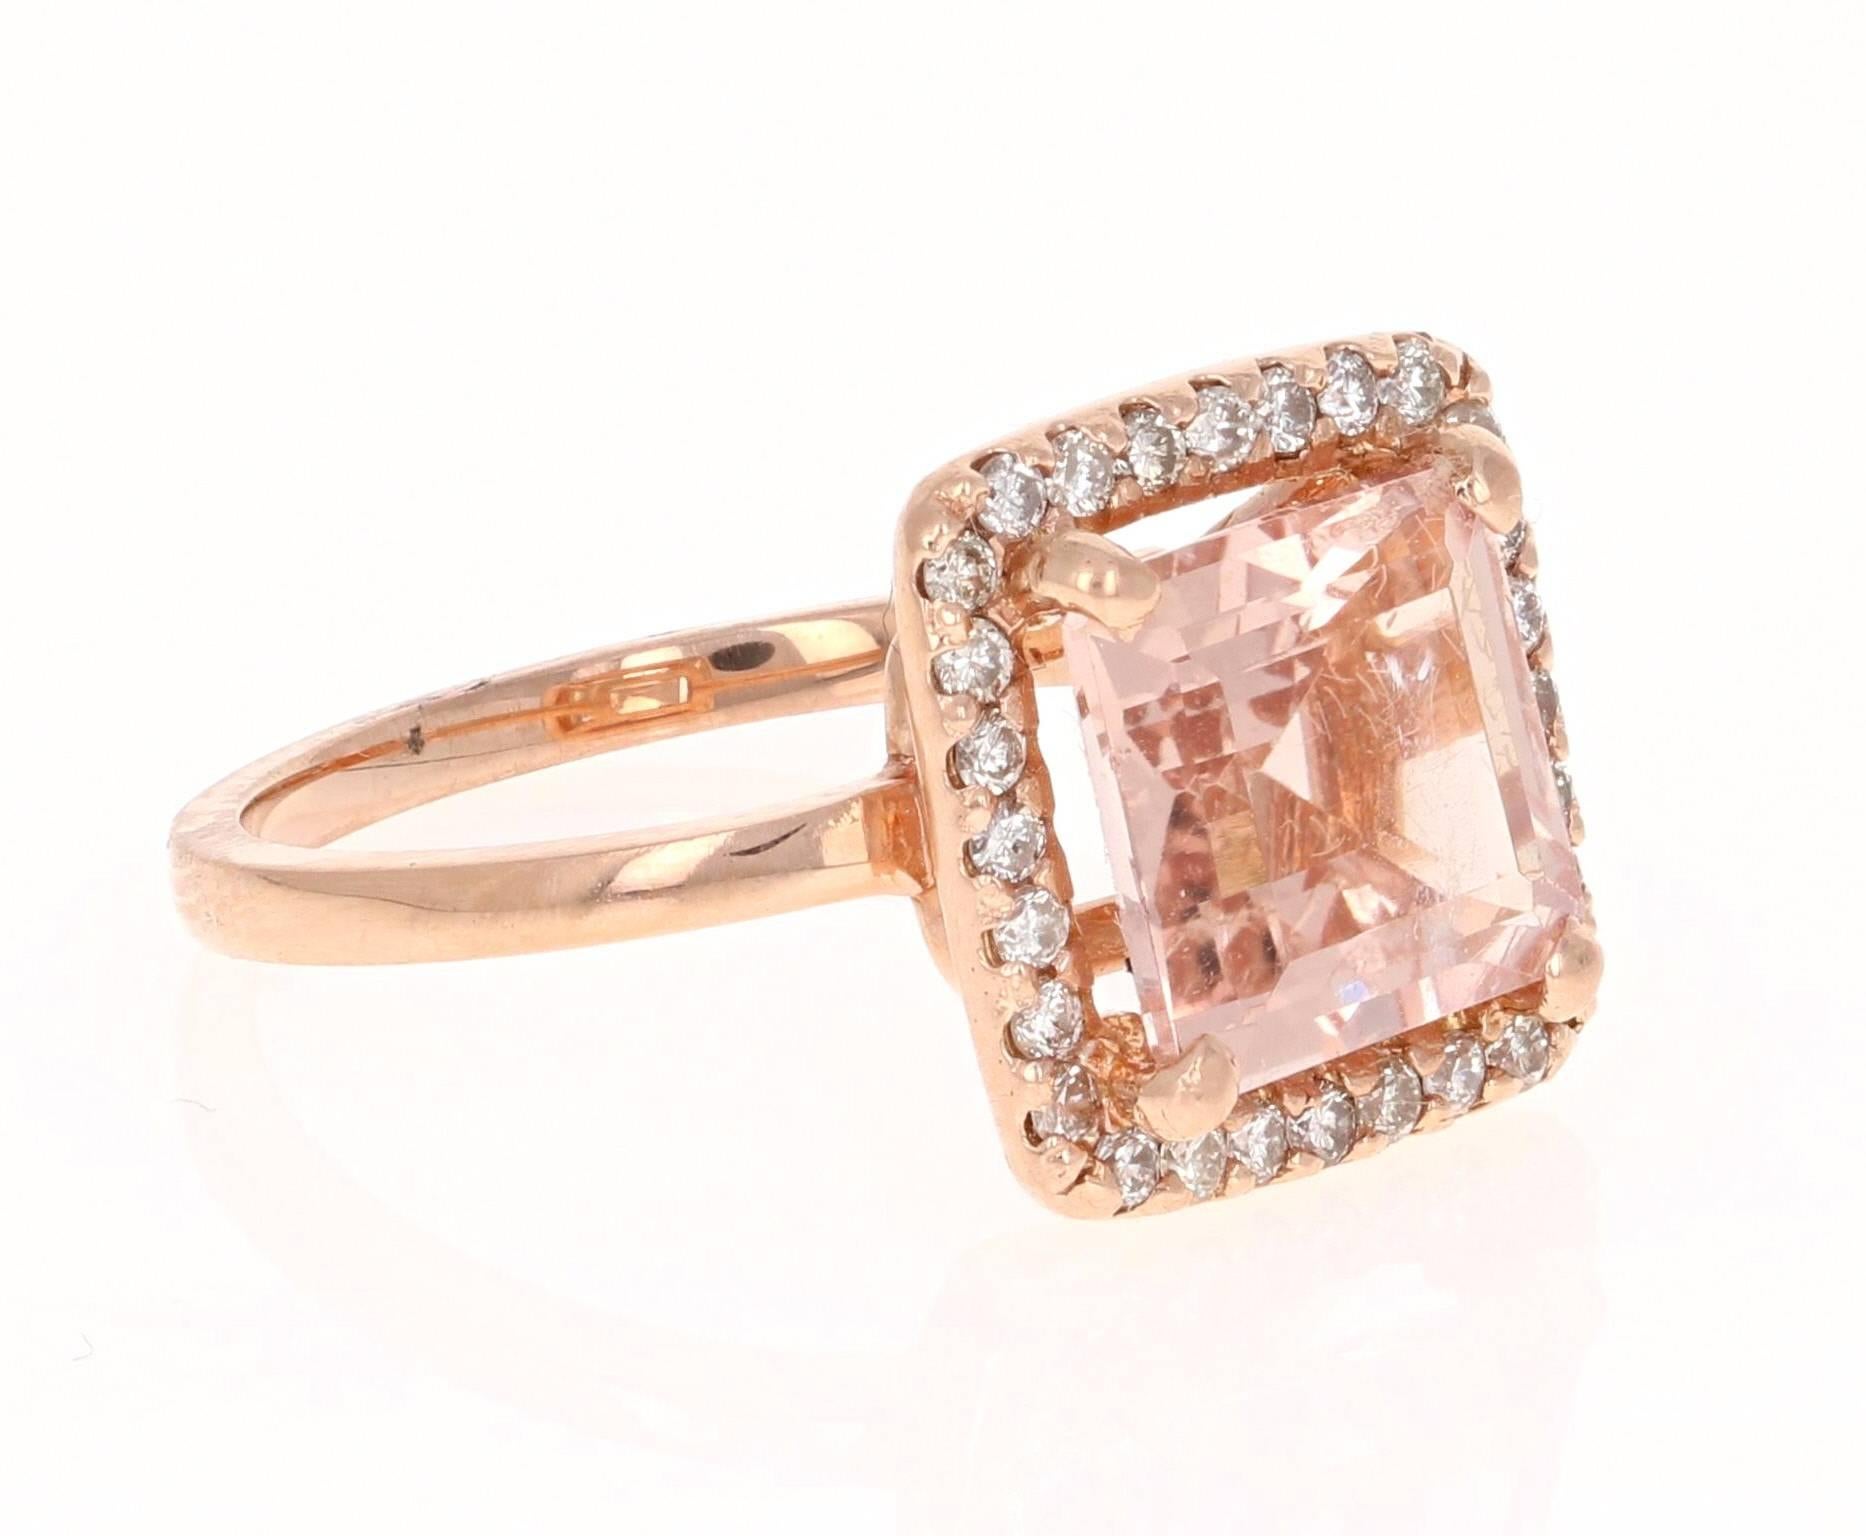 3.96 Carat Morganite Diamond 14 Karat Rose Gold Engagement Ring
A gorgeous modern setting! This ring has a 3.58 carat Square Cut Morganite in the center of the ring and is surrounded by 28 Round Cut Diamonds that weigh 0.38 carats. The ring is